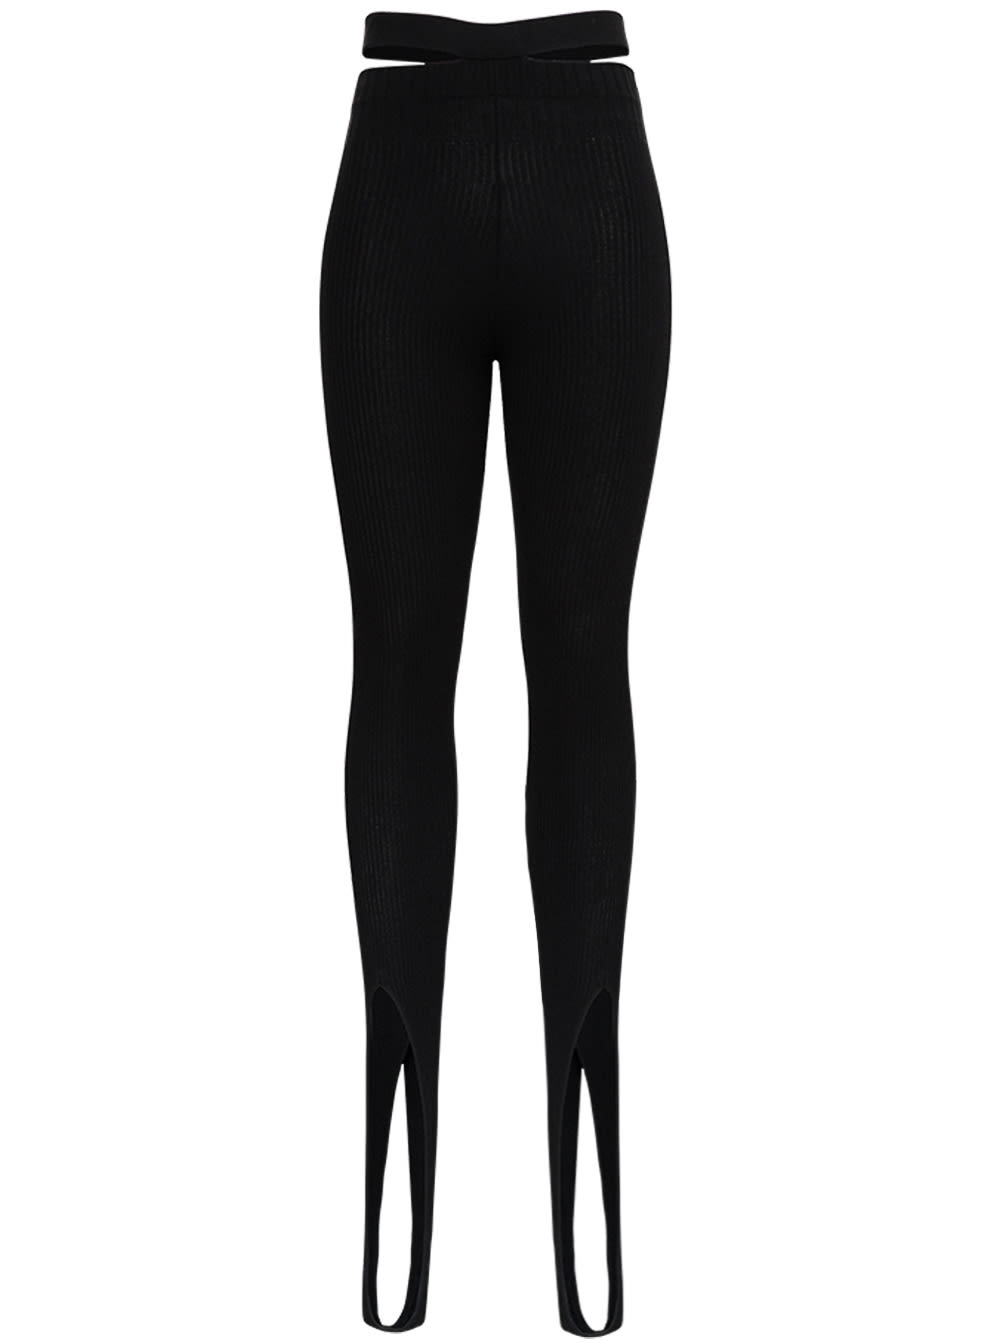 ANDREADAMO Ribbed Knit Leggings With Cut Out Details